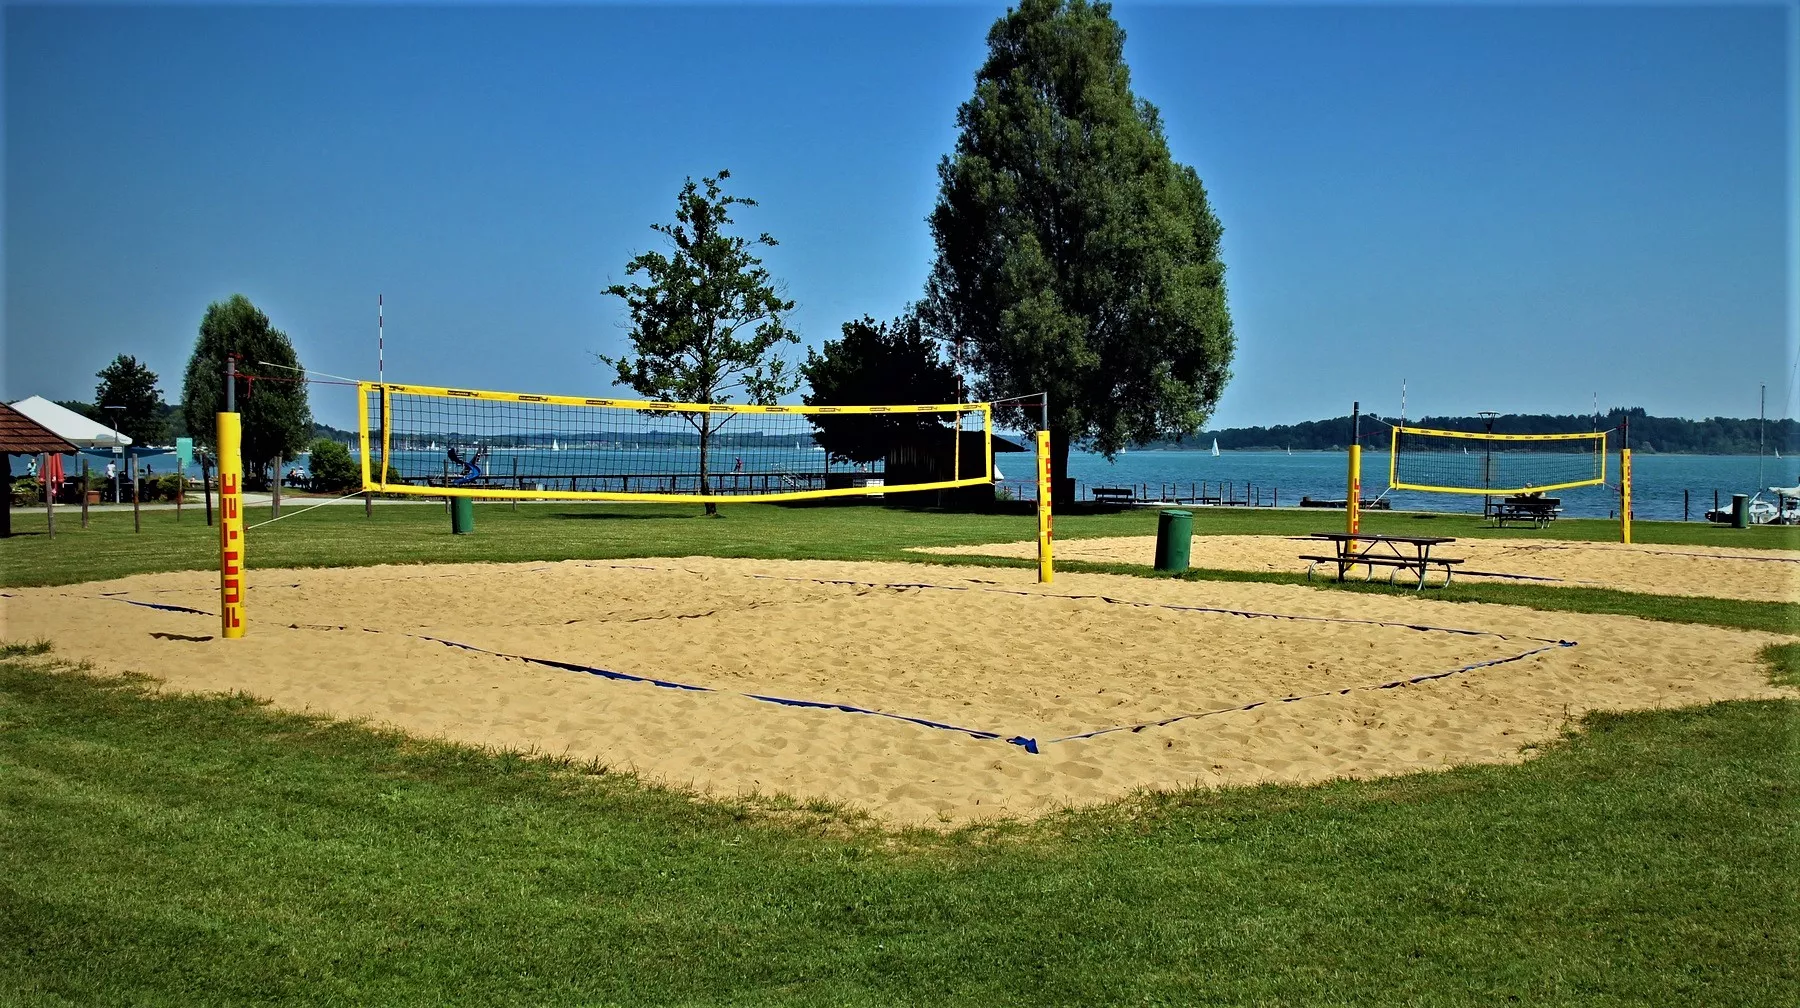 Sporttreff Soccerfive & Beach Arena in Germany, Europe | Volleyball - Rated 3.8